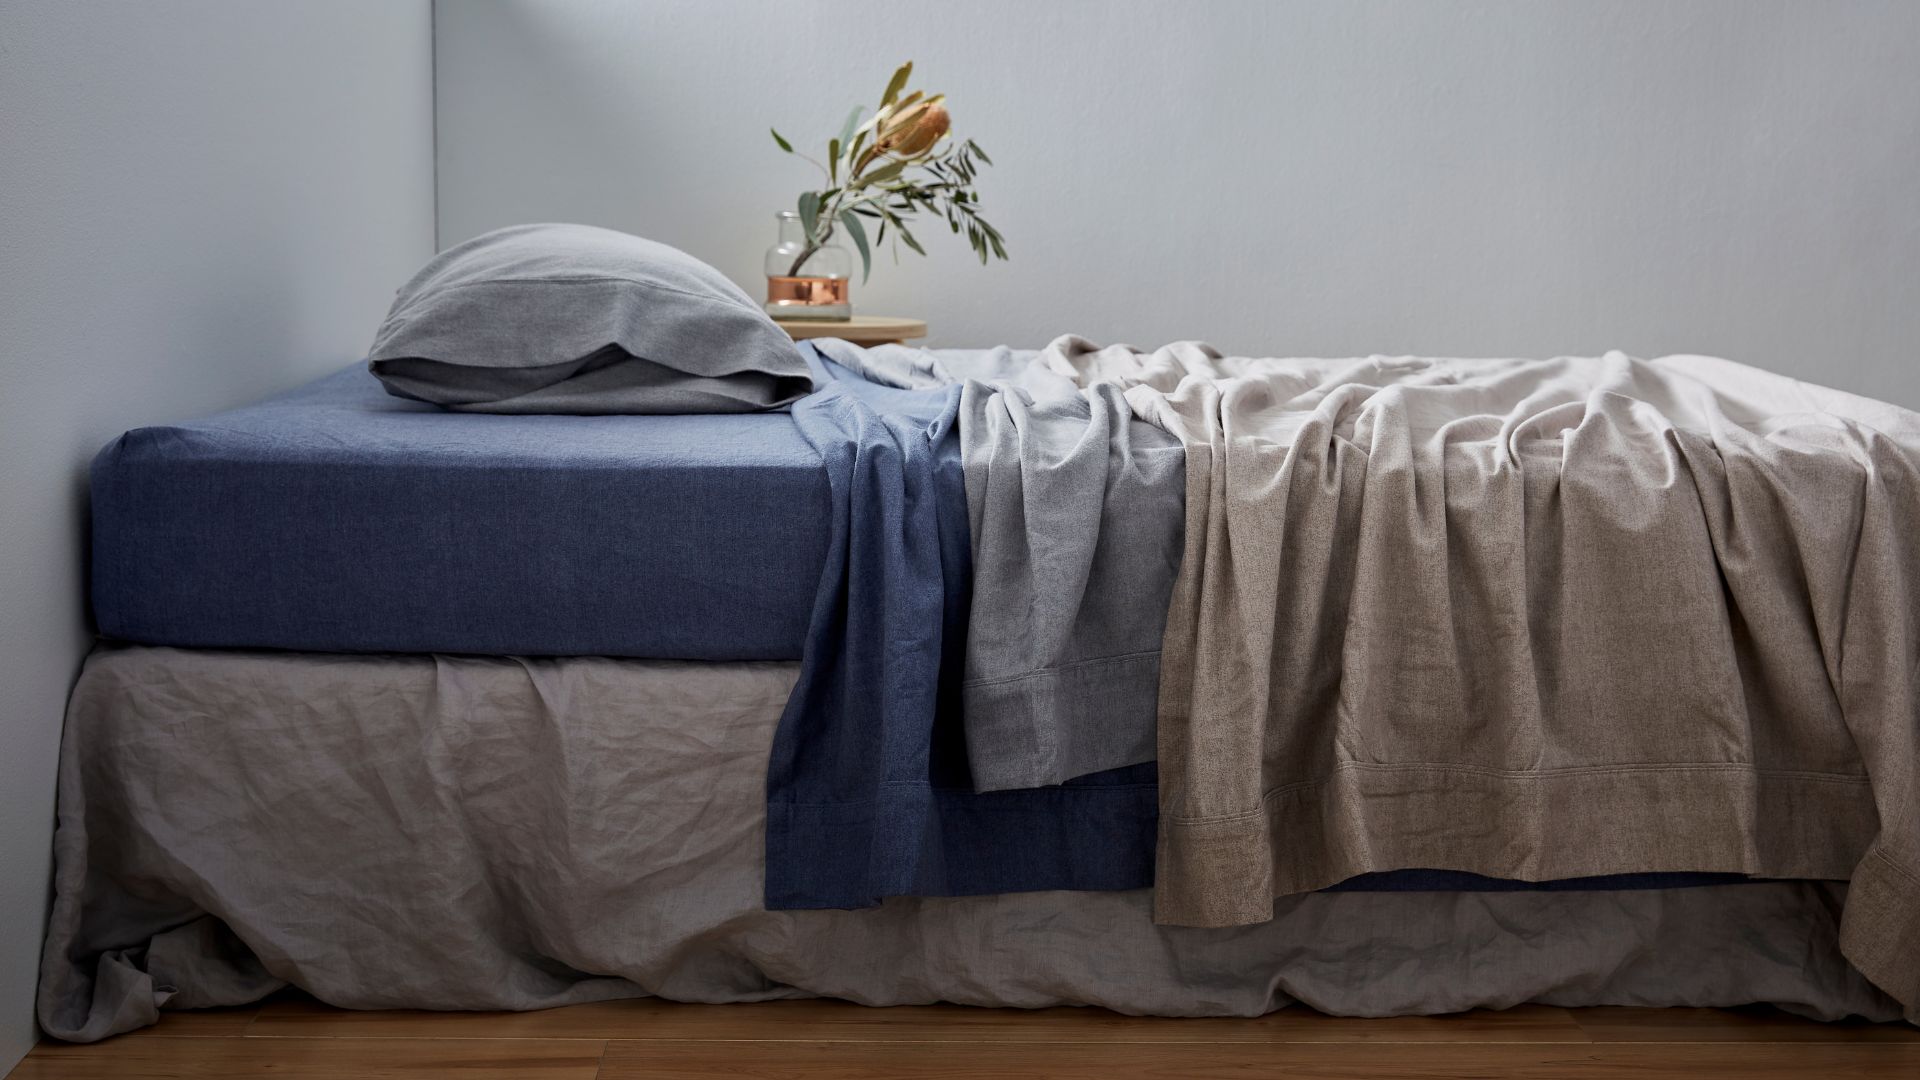 How To Choose The Best Fabric For Bed Sheets - Everything You Need To Know